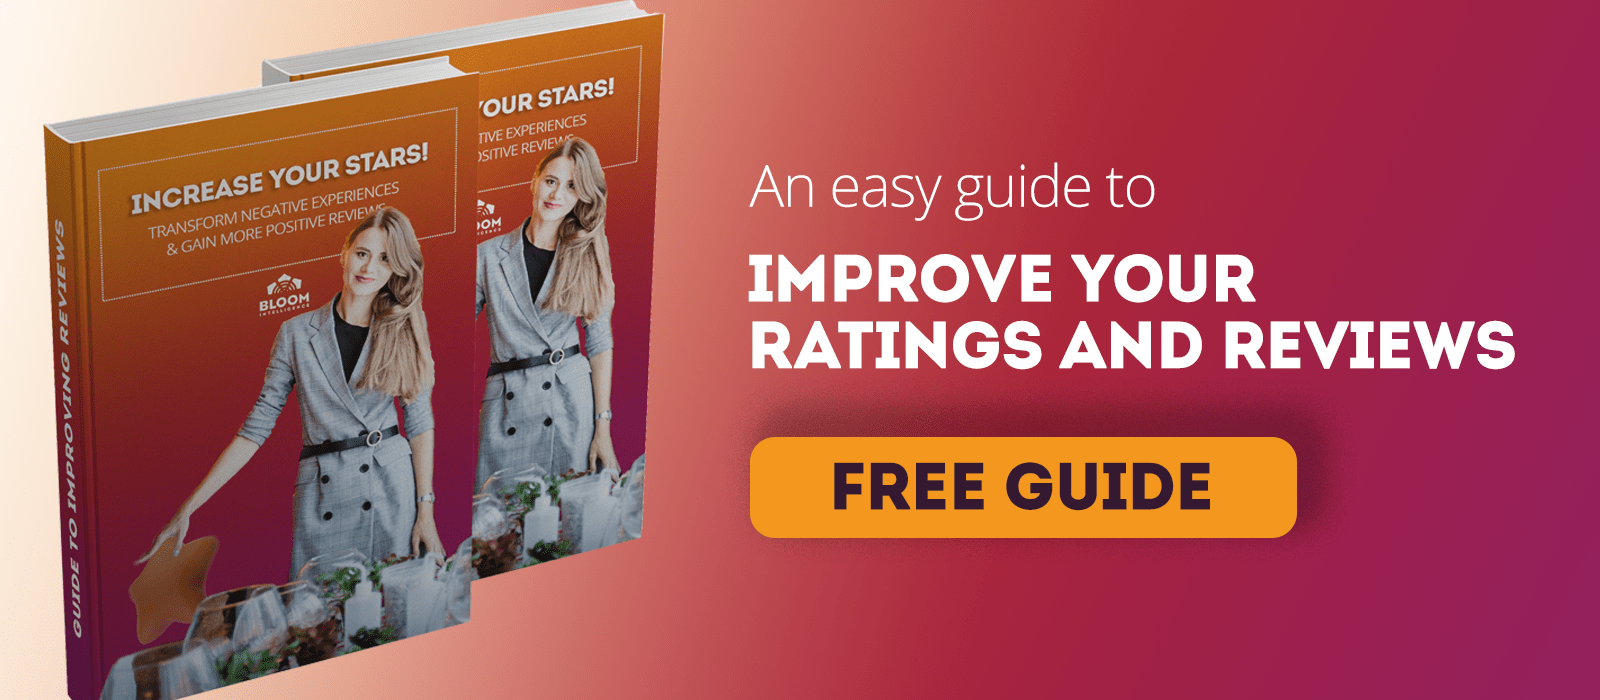 improving ratings and reviews guide